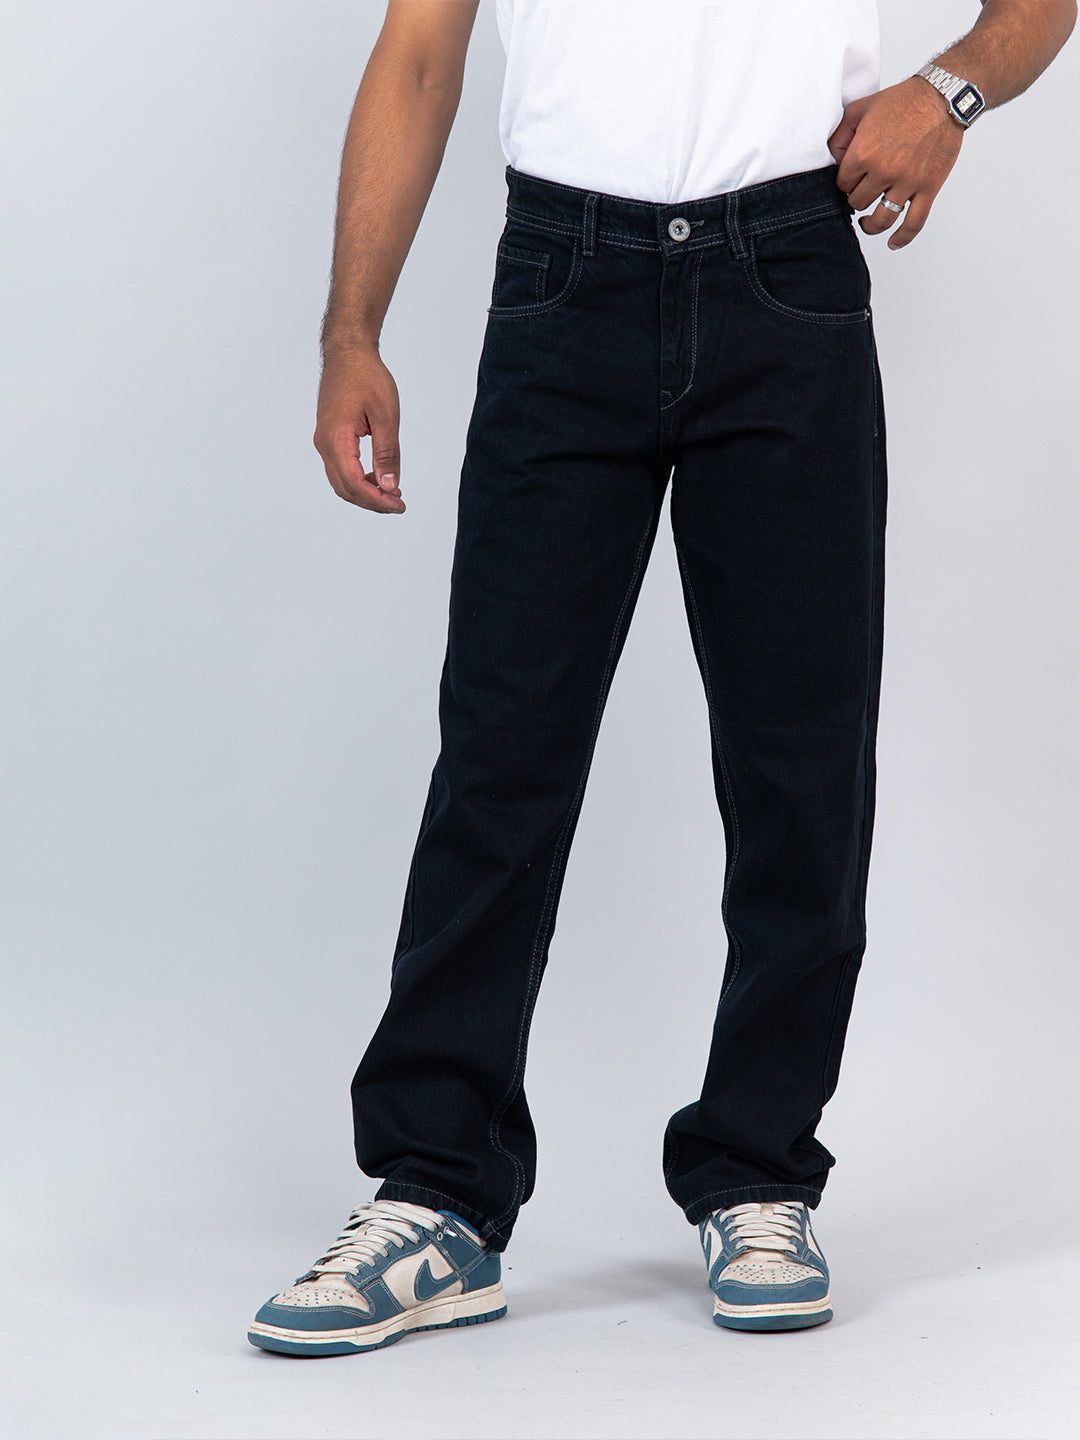 Buy Navy Blue Straight Fit Mens Jeans online - Tistabene